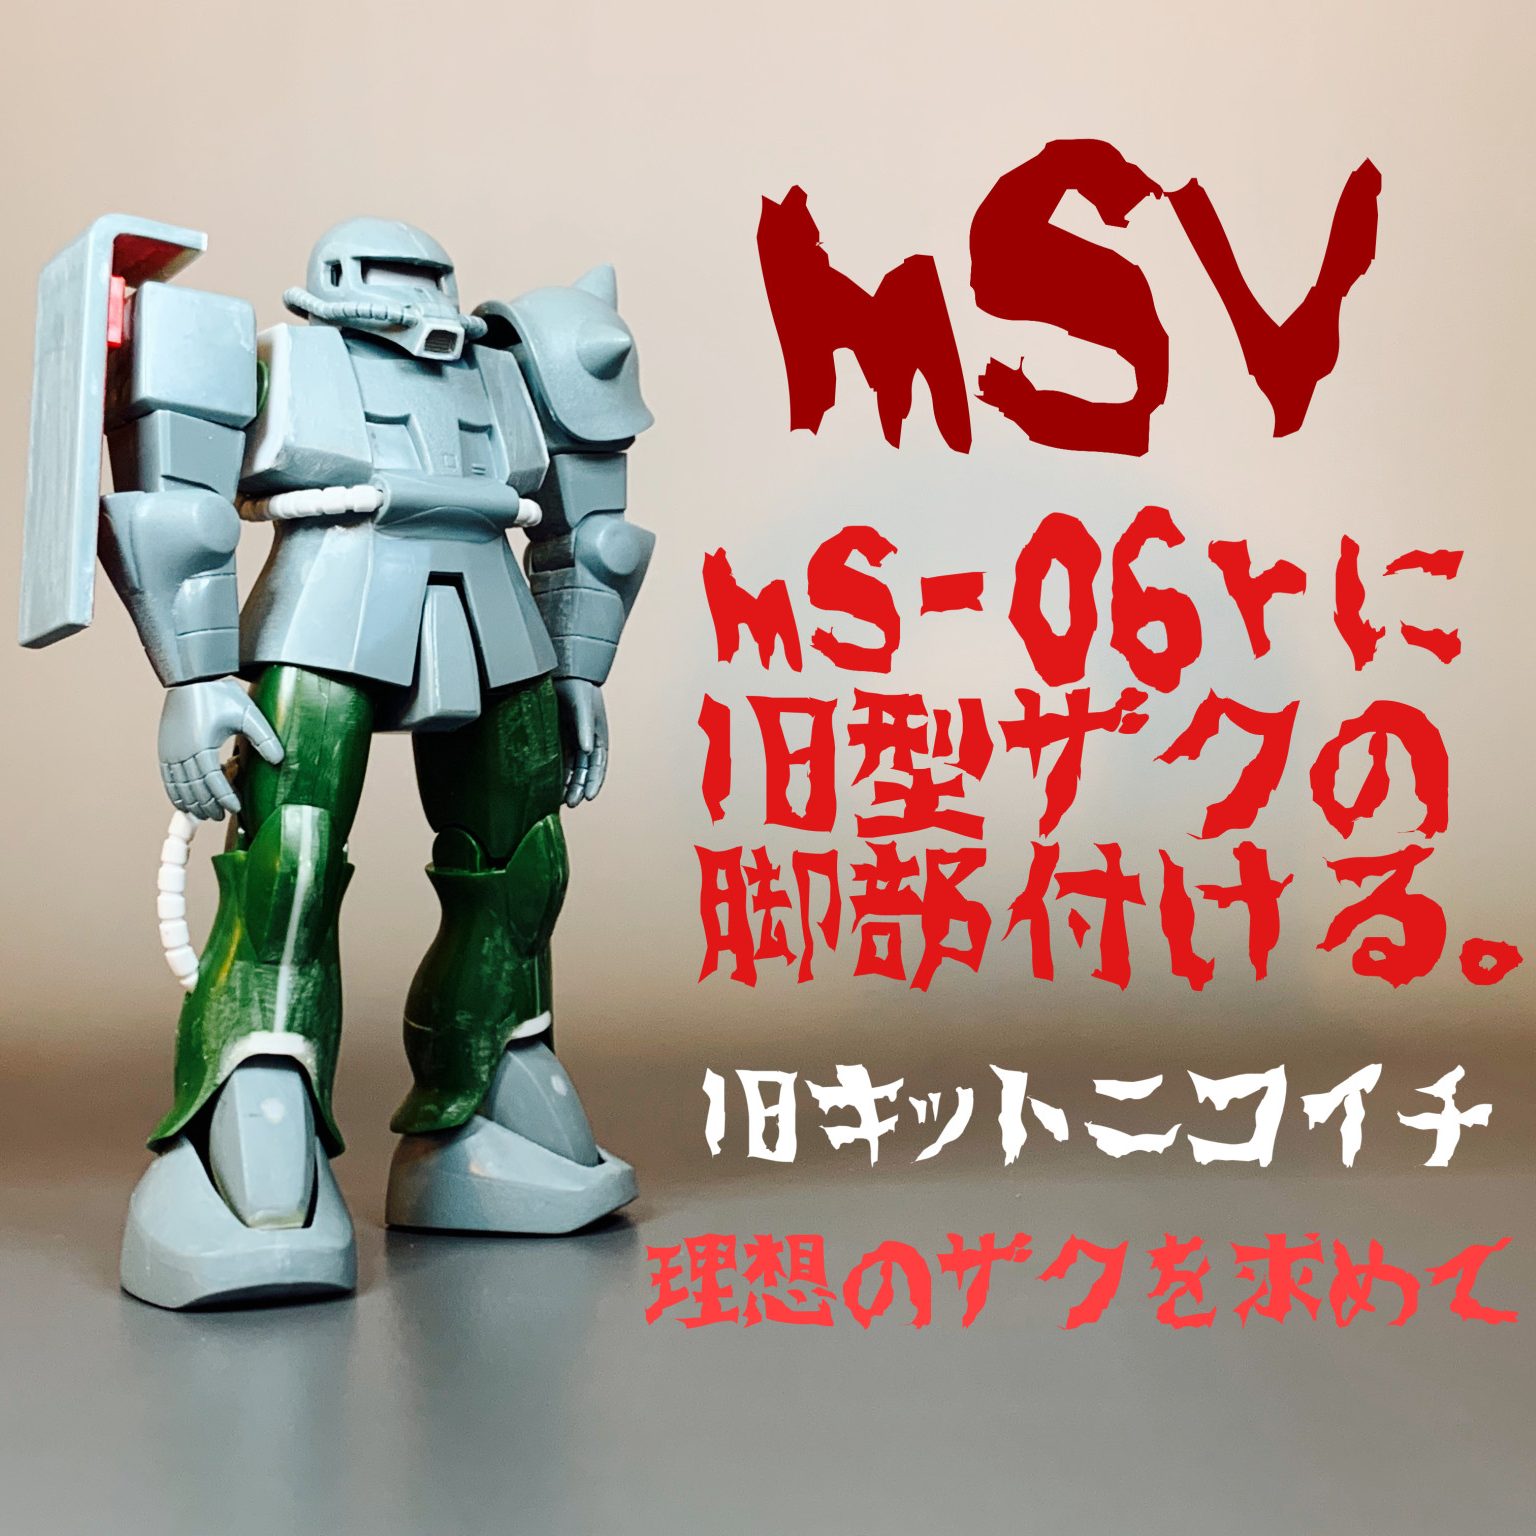 MSVのMS-06Rに旧型ザクの脚部付ける。〜無塗装仕上げ〜